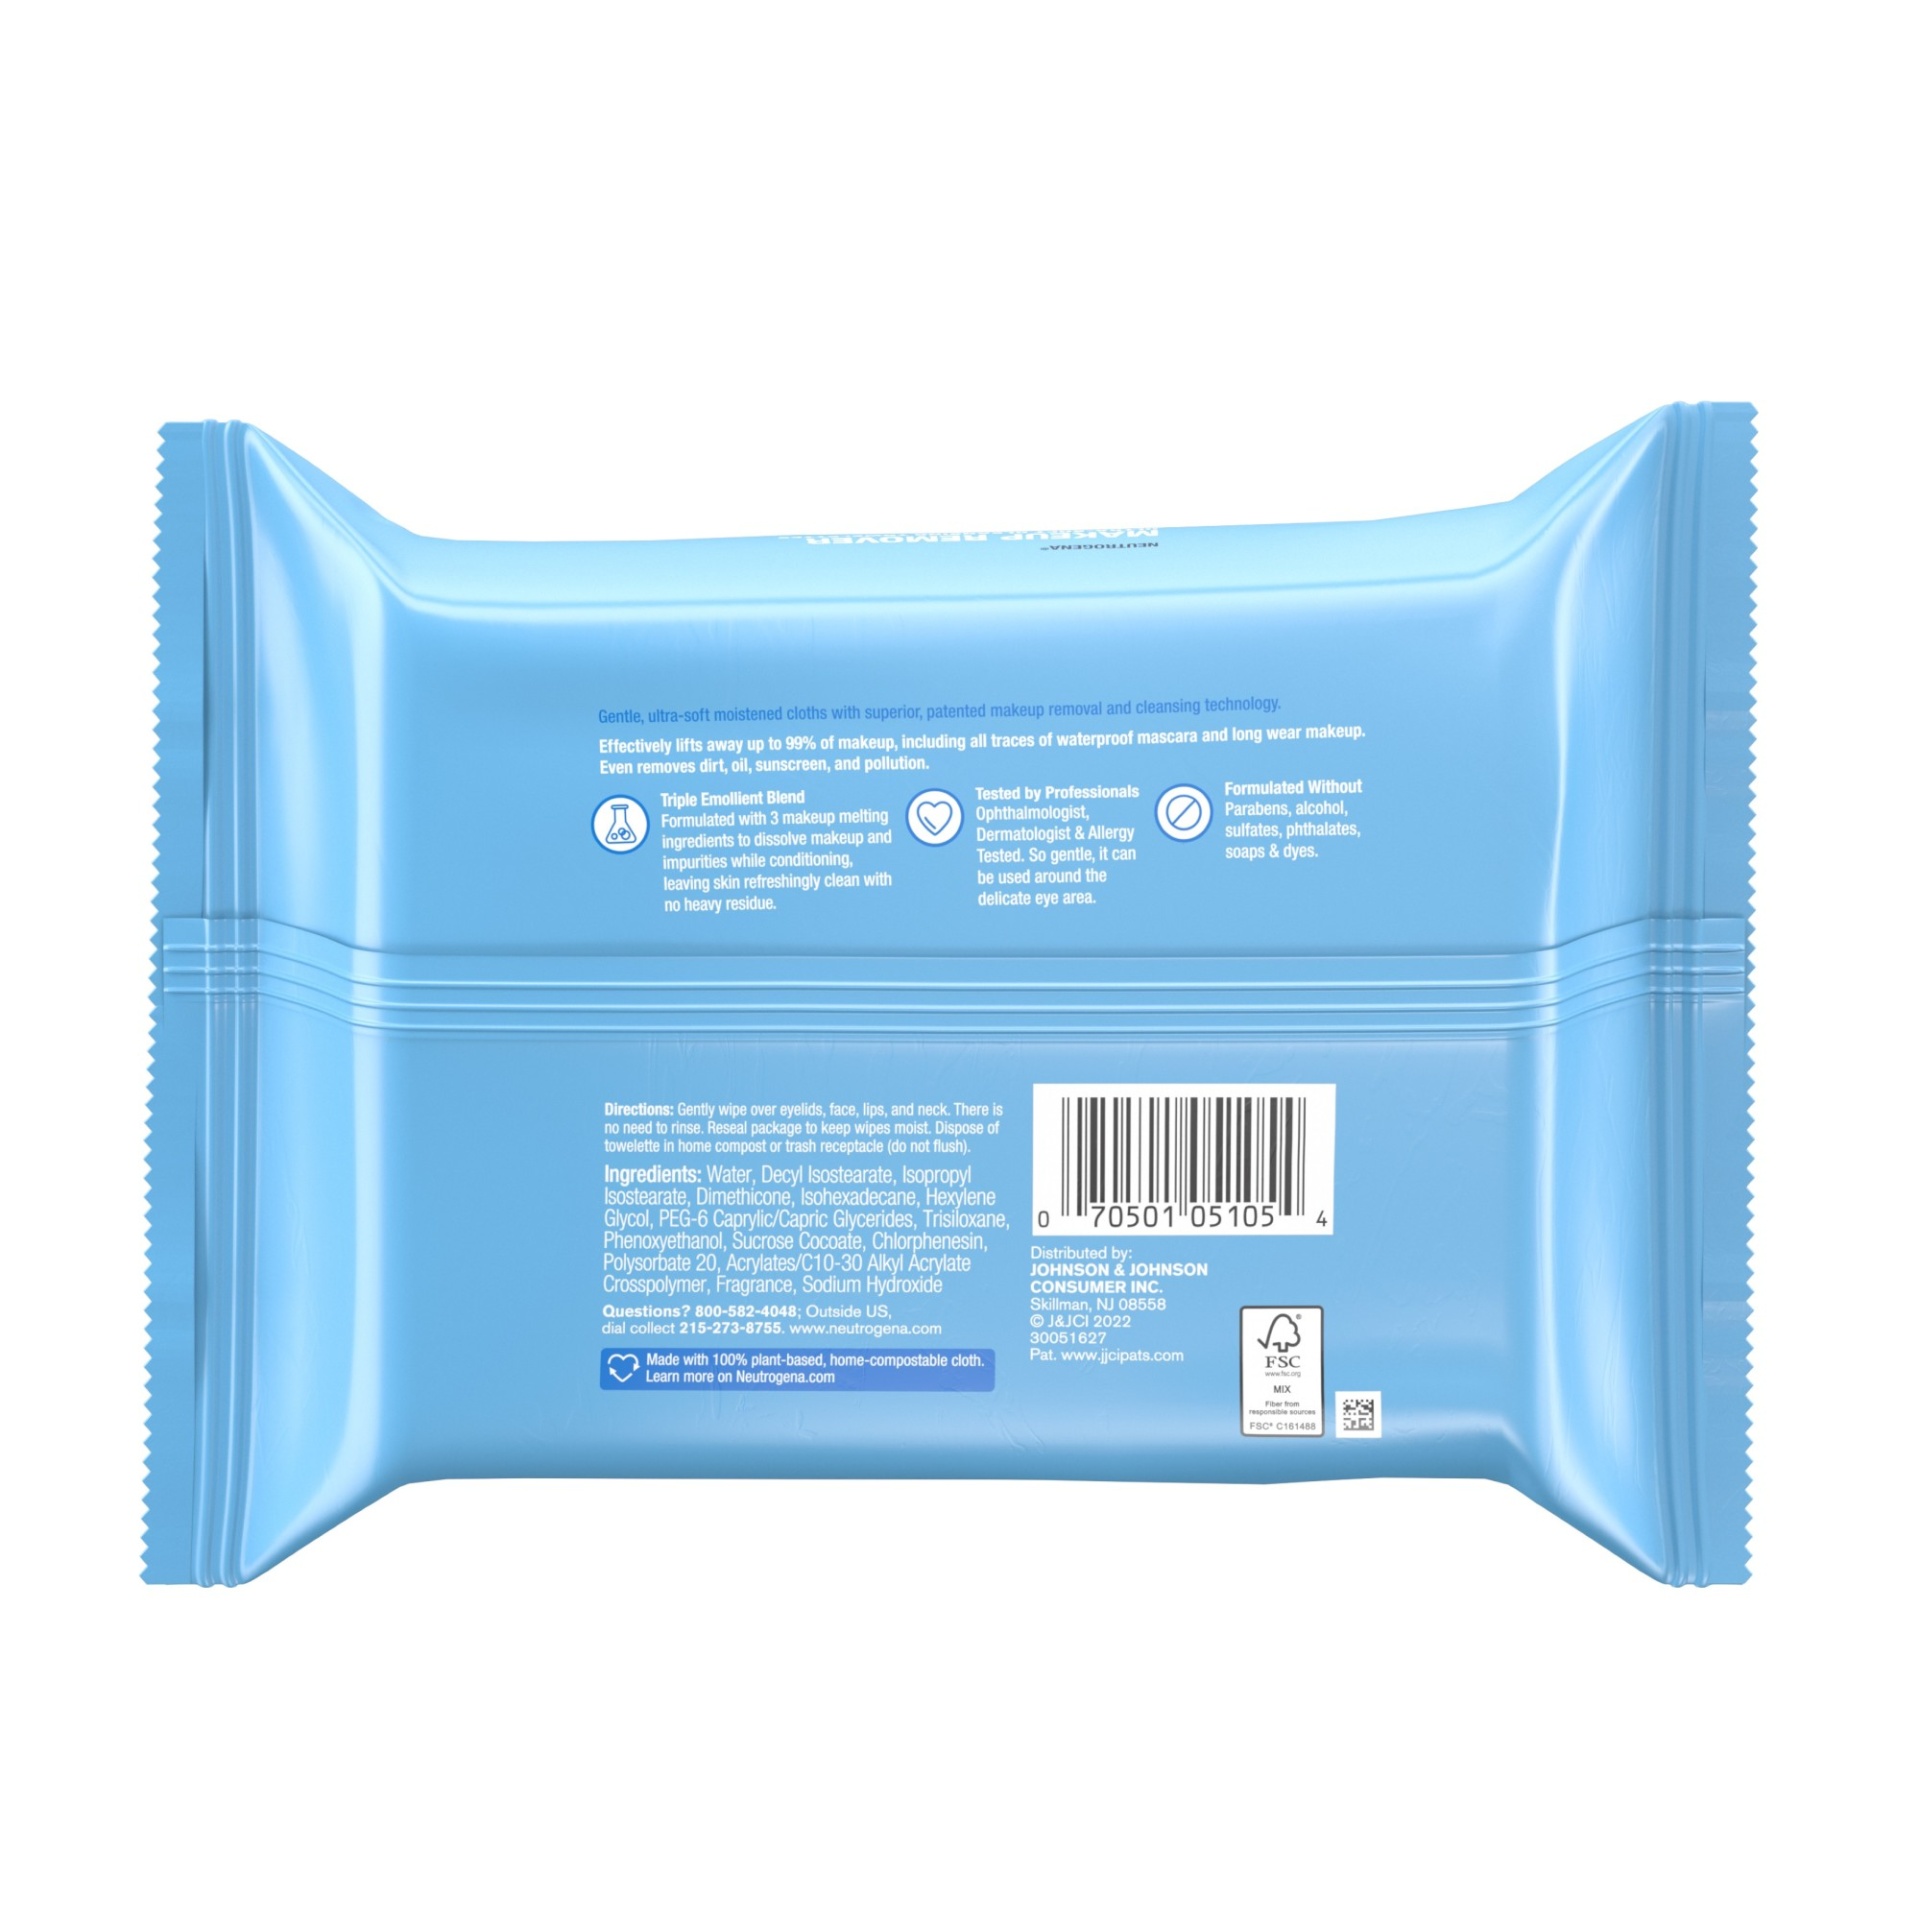 slide 2 of 7, Neutrogena Makeup Remover Facial Cleansing Towelettes, Daily Face Wipes Remove Dirt, Oil, Sweat, Makeup & Waterproof Mascara, Gentle, Soap- & Alcohol-Free, 100% Plant-Based Fibers, 25 ct